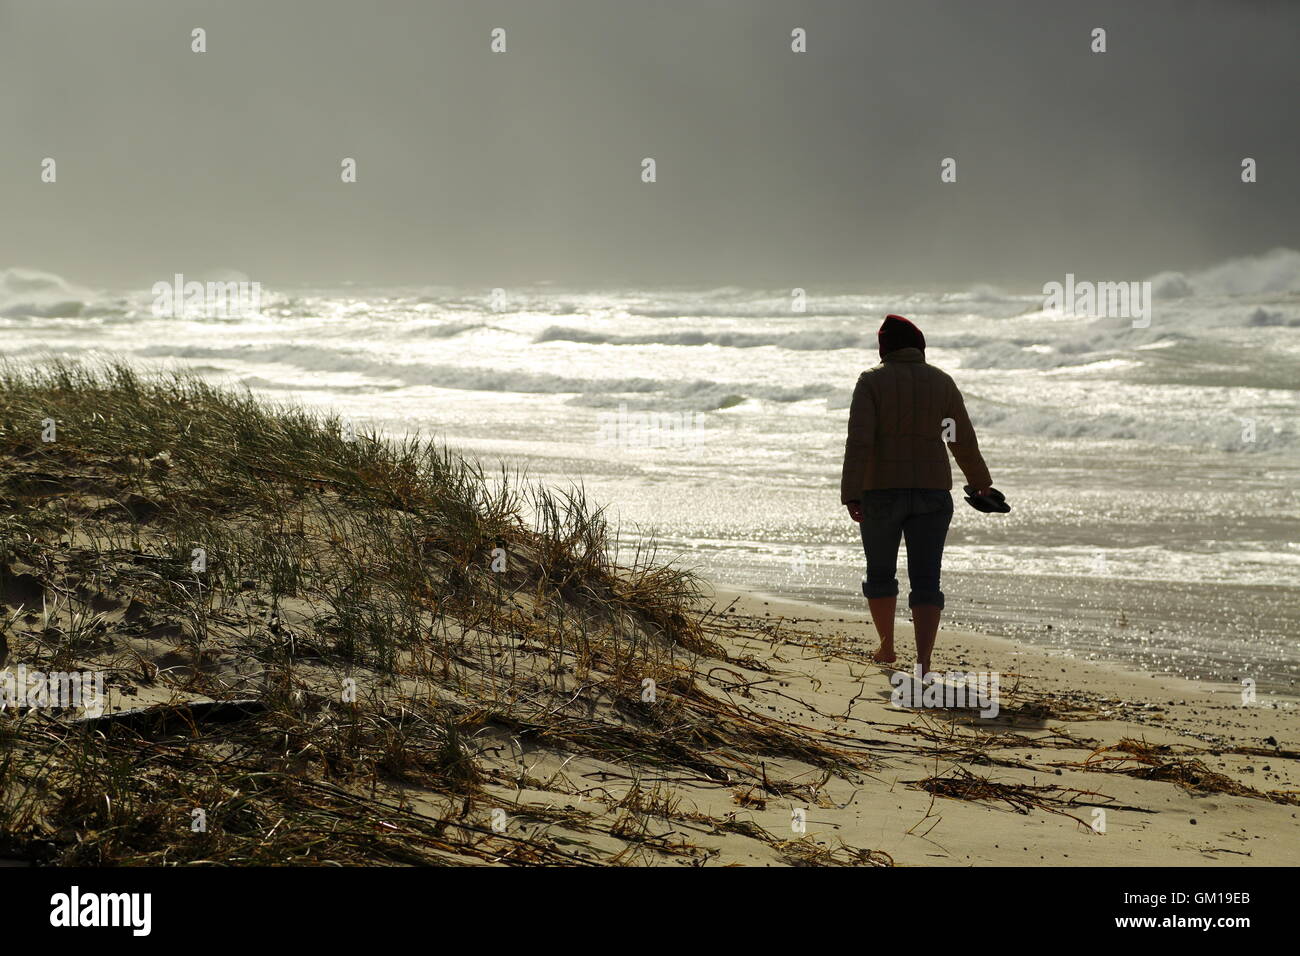 A young lady in her thirties braces against the winter storm as she walks barefoot on a beach at Iluka in NSW, Australia. Stock Photo